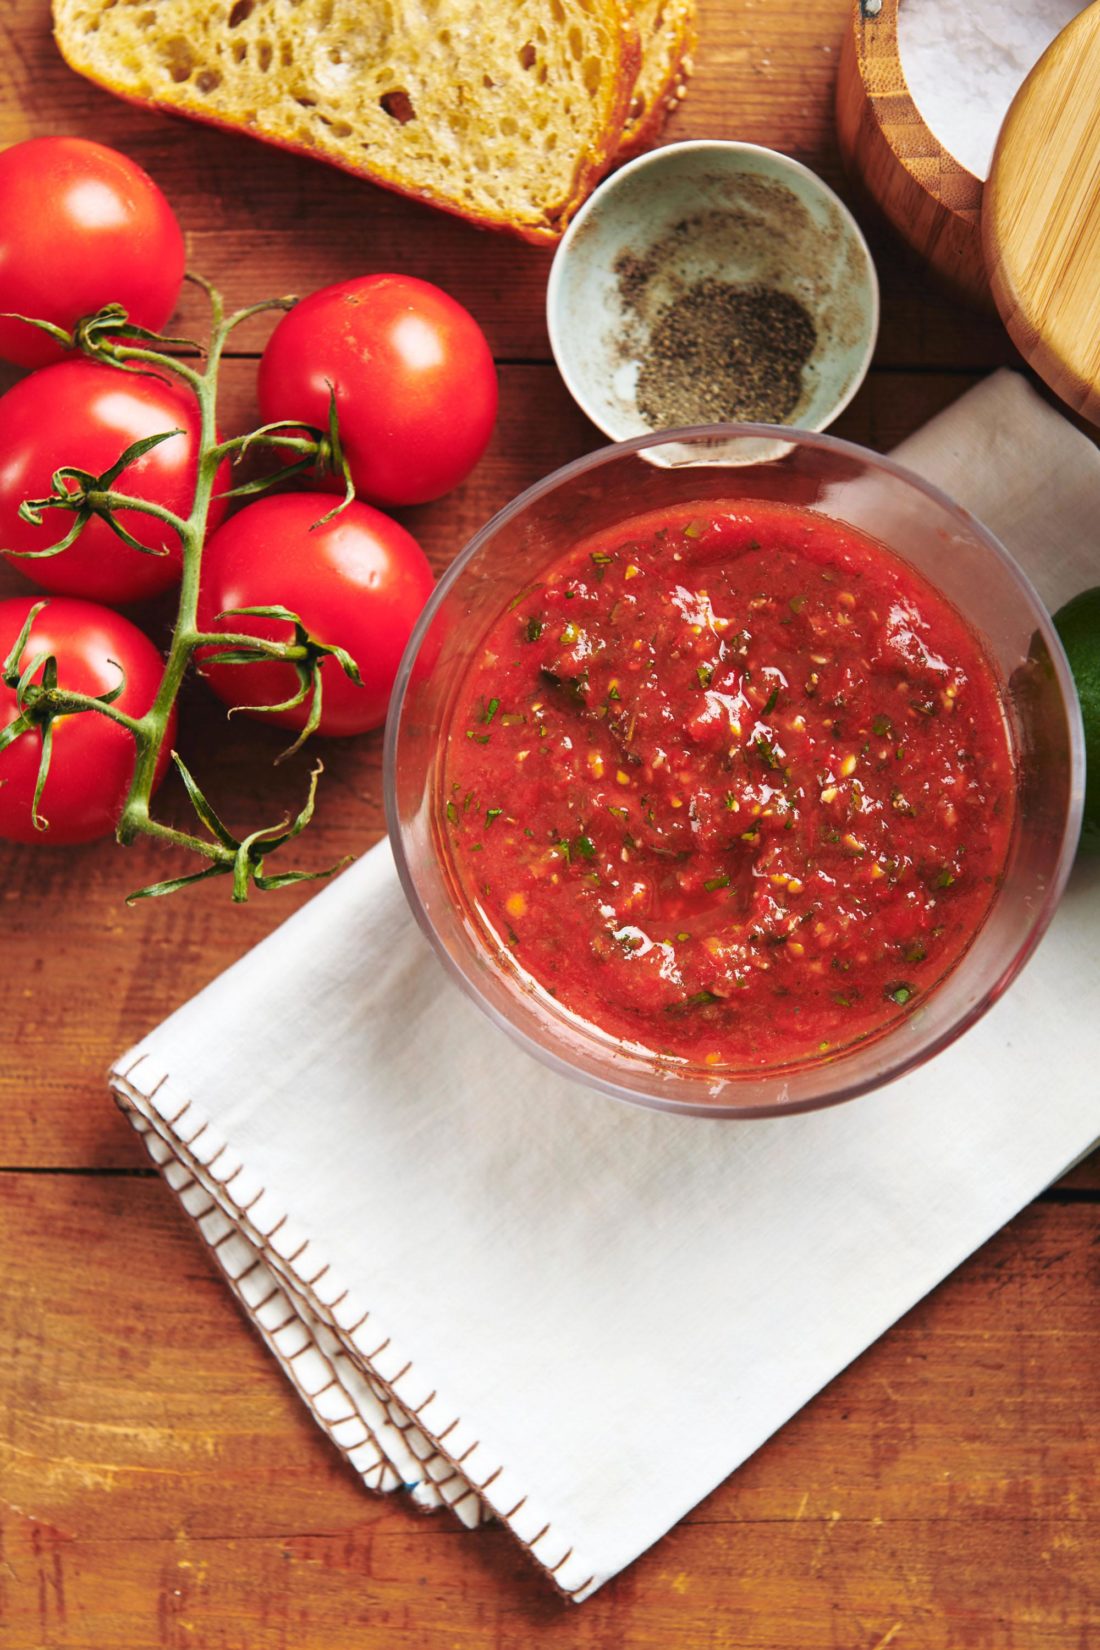 Bowl of Salsa Ranchera on a table with tomatoes and pepper.